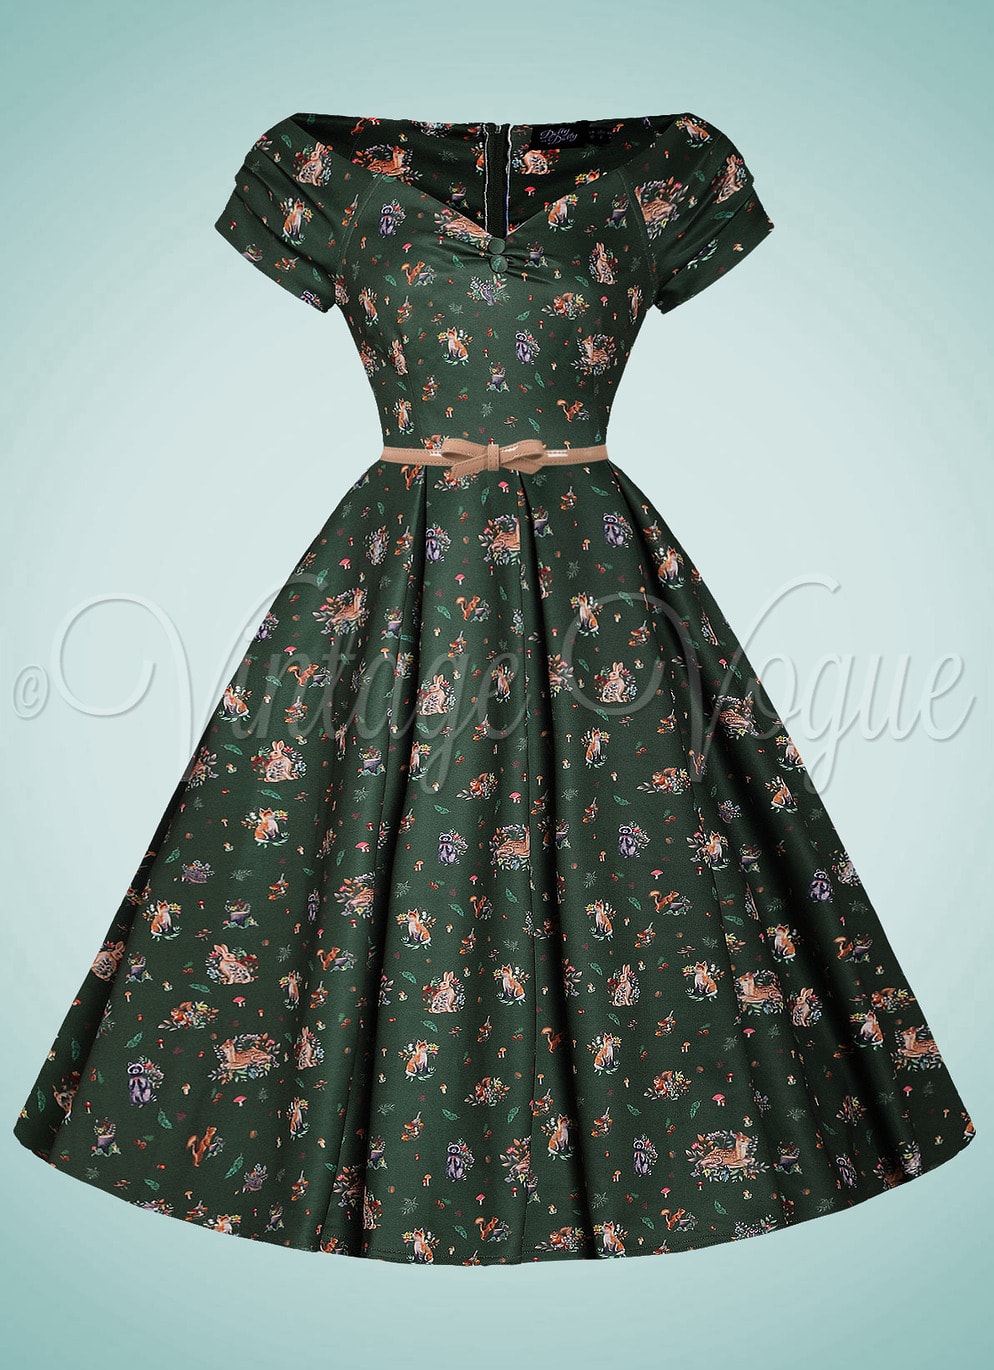 Dolly and Dotty 50's Retro Vintage Swing Herbst Fuchs Kleid Lily in Dunkelgrün 50er Jahre Petticoat Damenkleid Dress Vintage Herbstkleid Fuchs Pilze Wald Igel Eulen Hirsch Muster Fairy Core